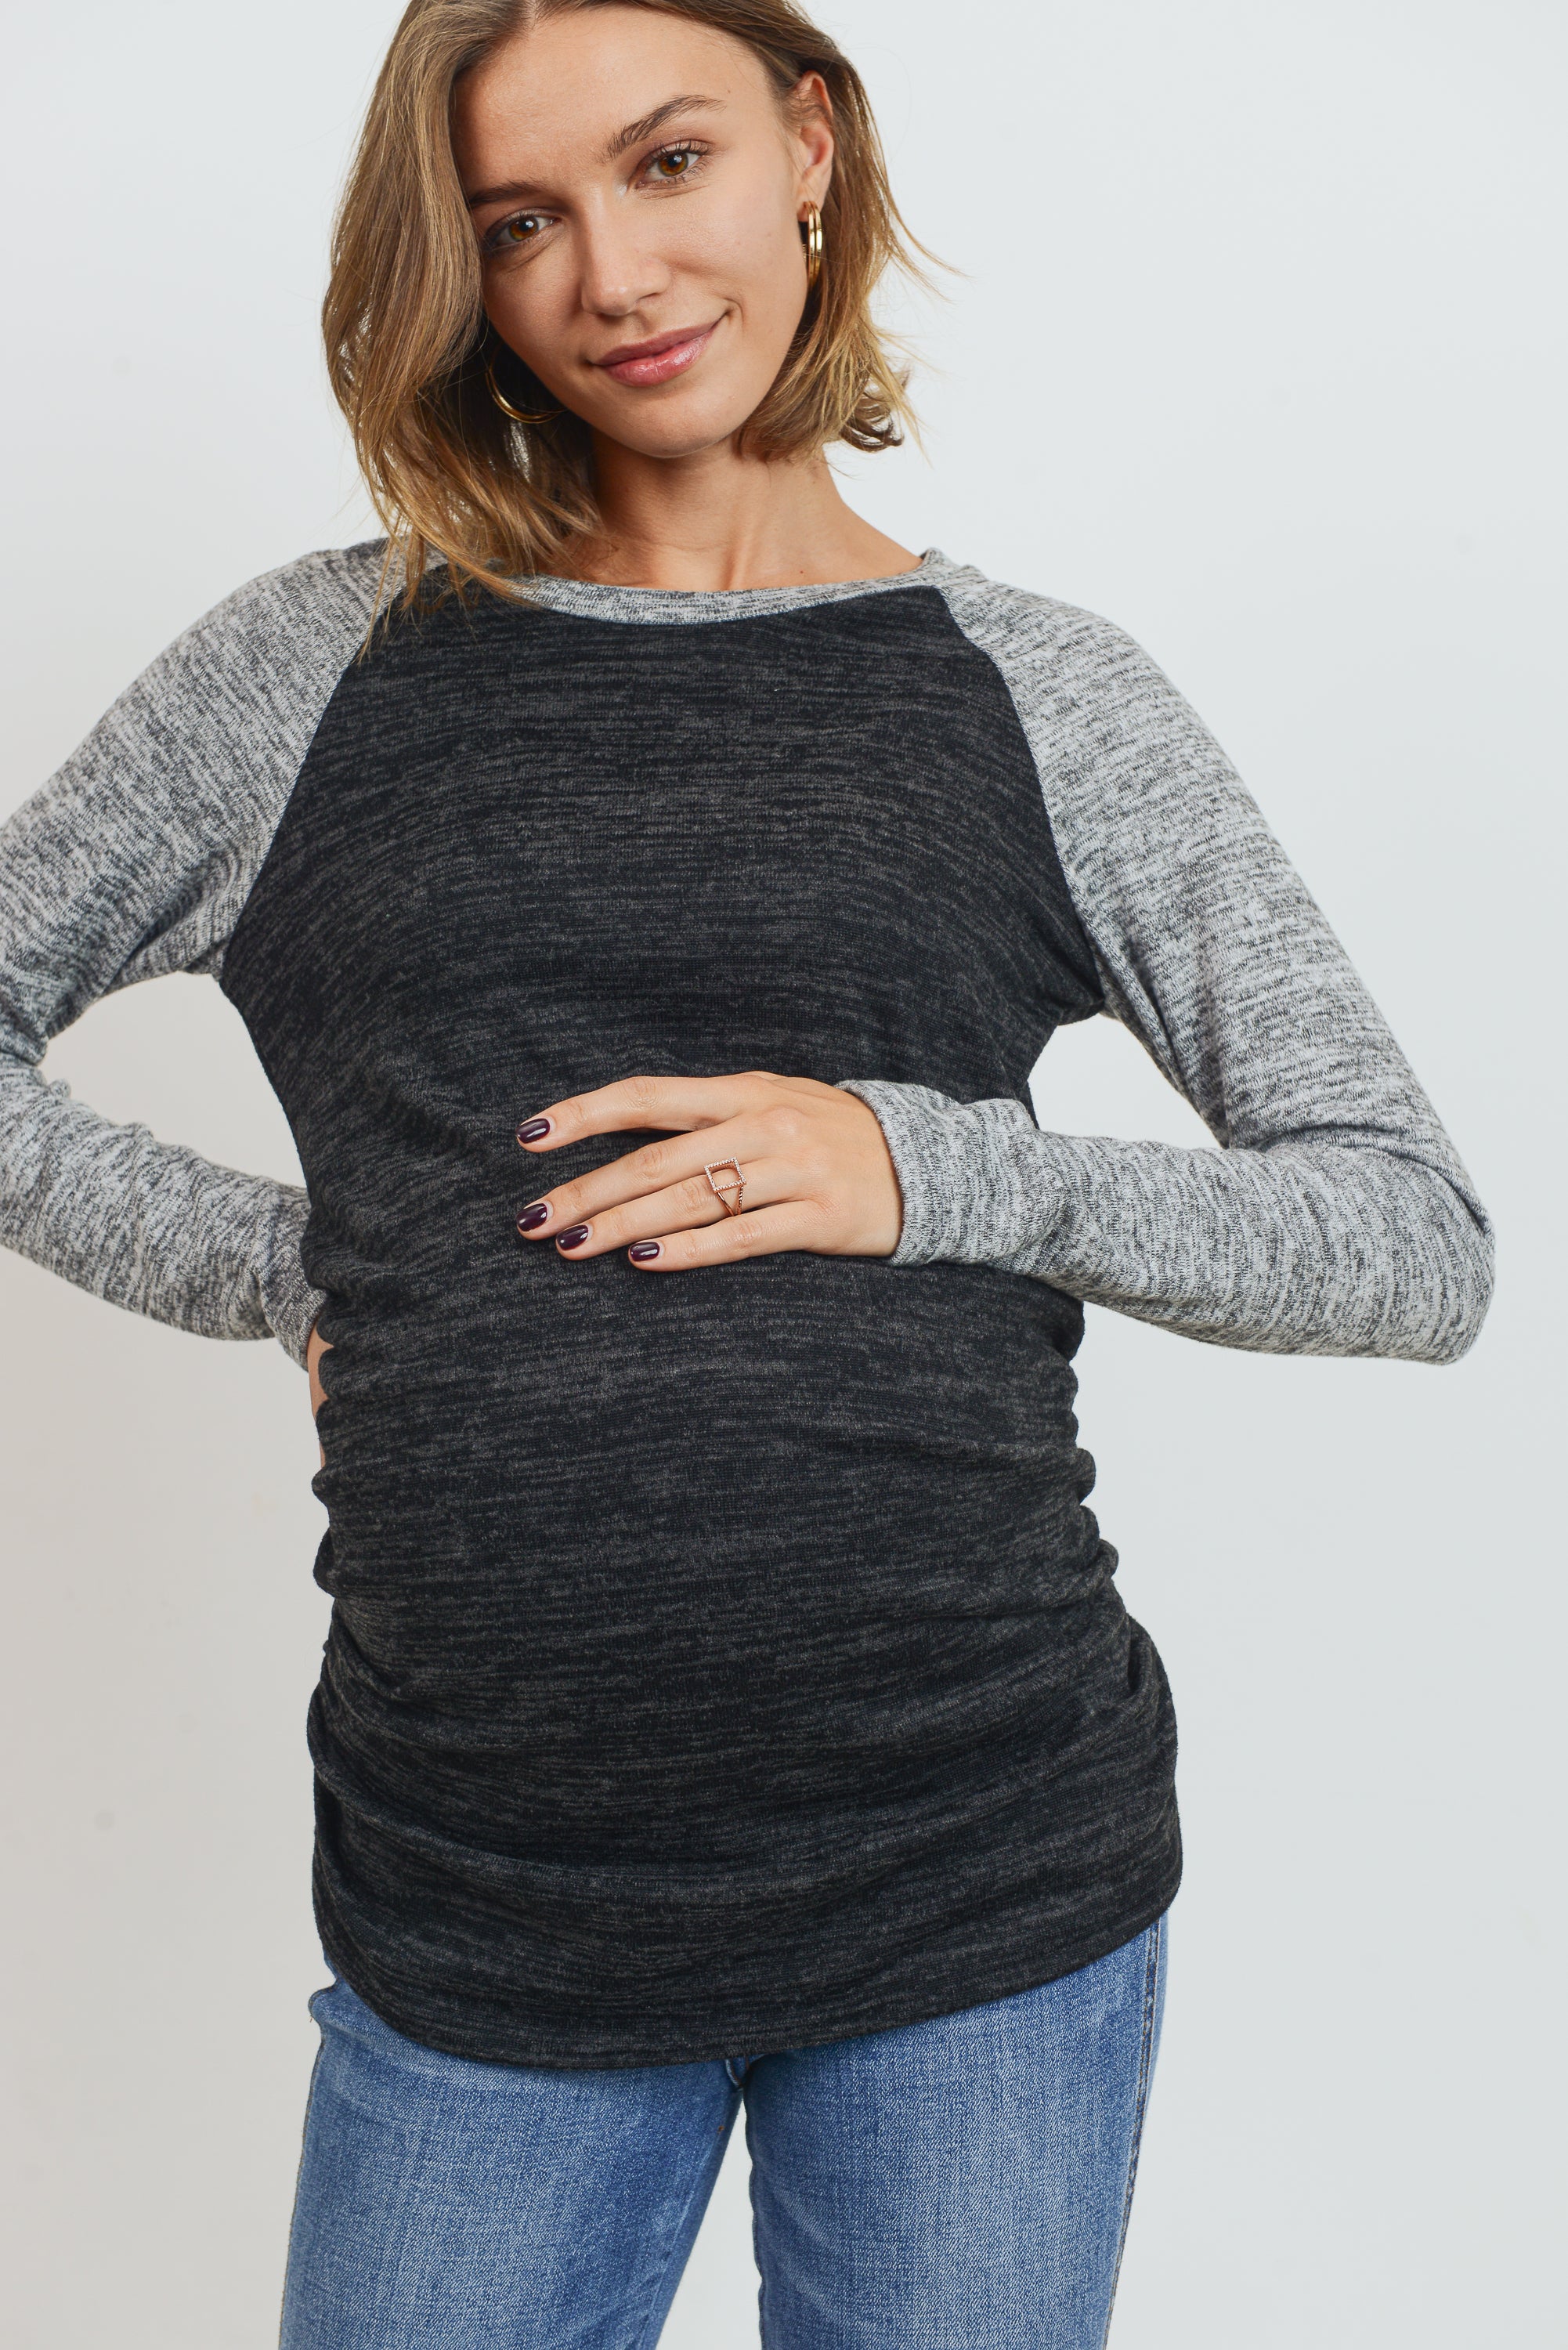 Sweater Maternity Knit Top